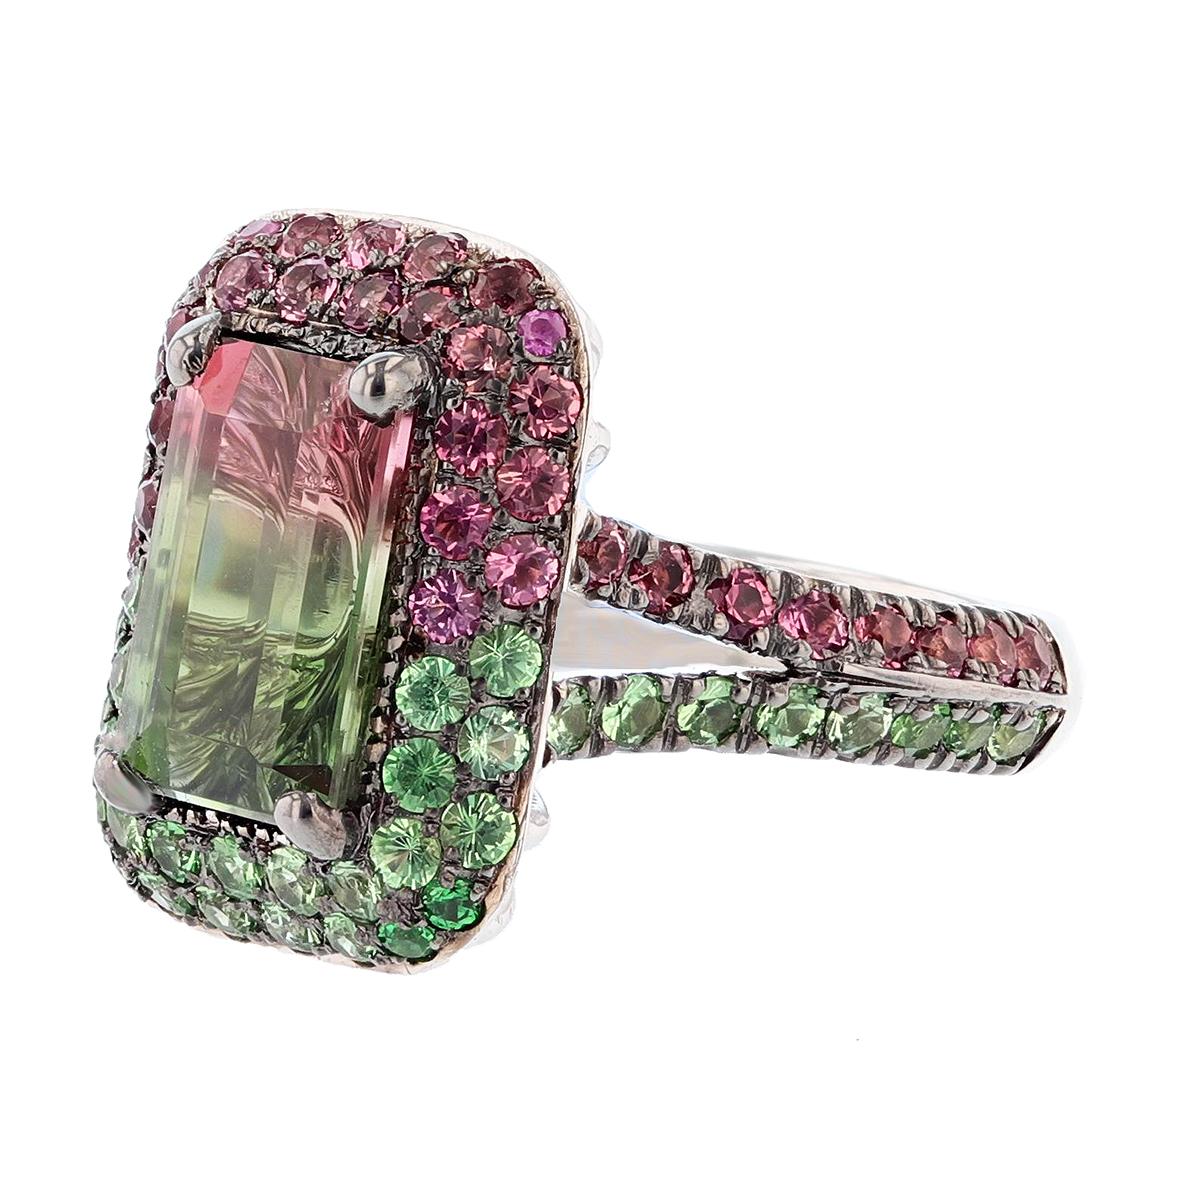 This ring is made in 18 karat white gold with black rhodium plating featuring one emerald cut prong set watermelon tourmaline weighing 4.23ct, 40 round cut prong set tsavorite weighing 0.98ct, and 41 round cut prong set pink tourmaline weighing